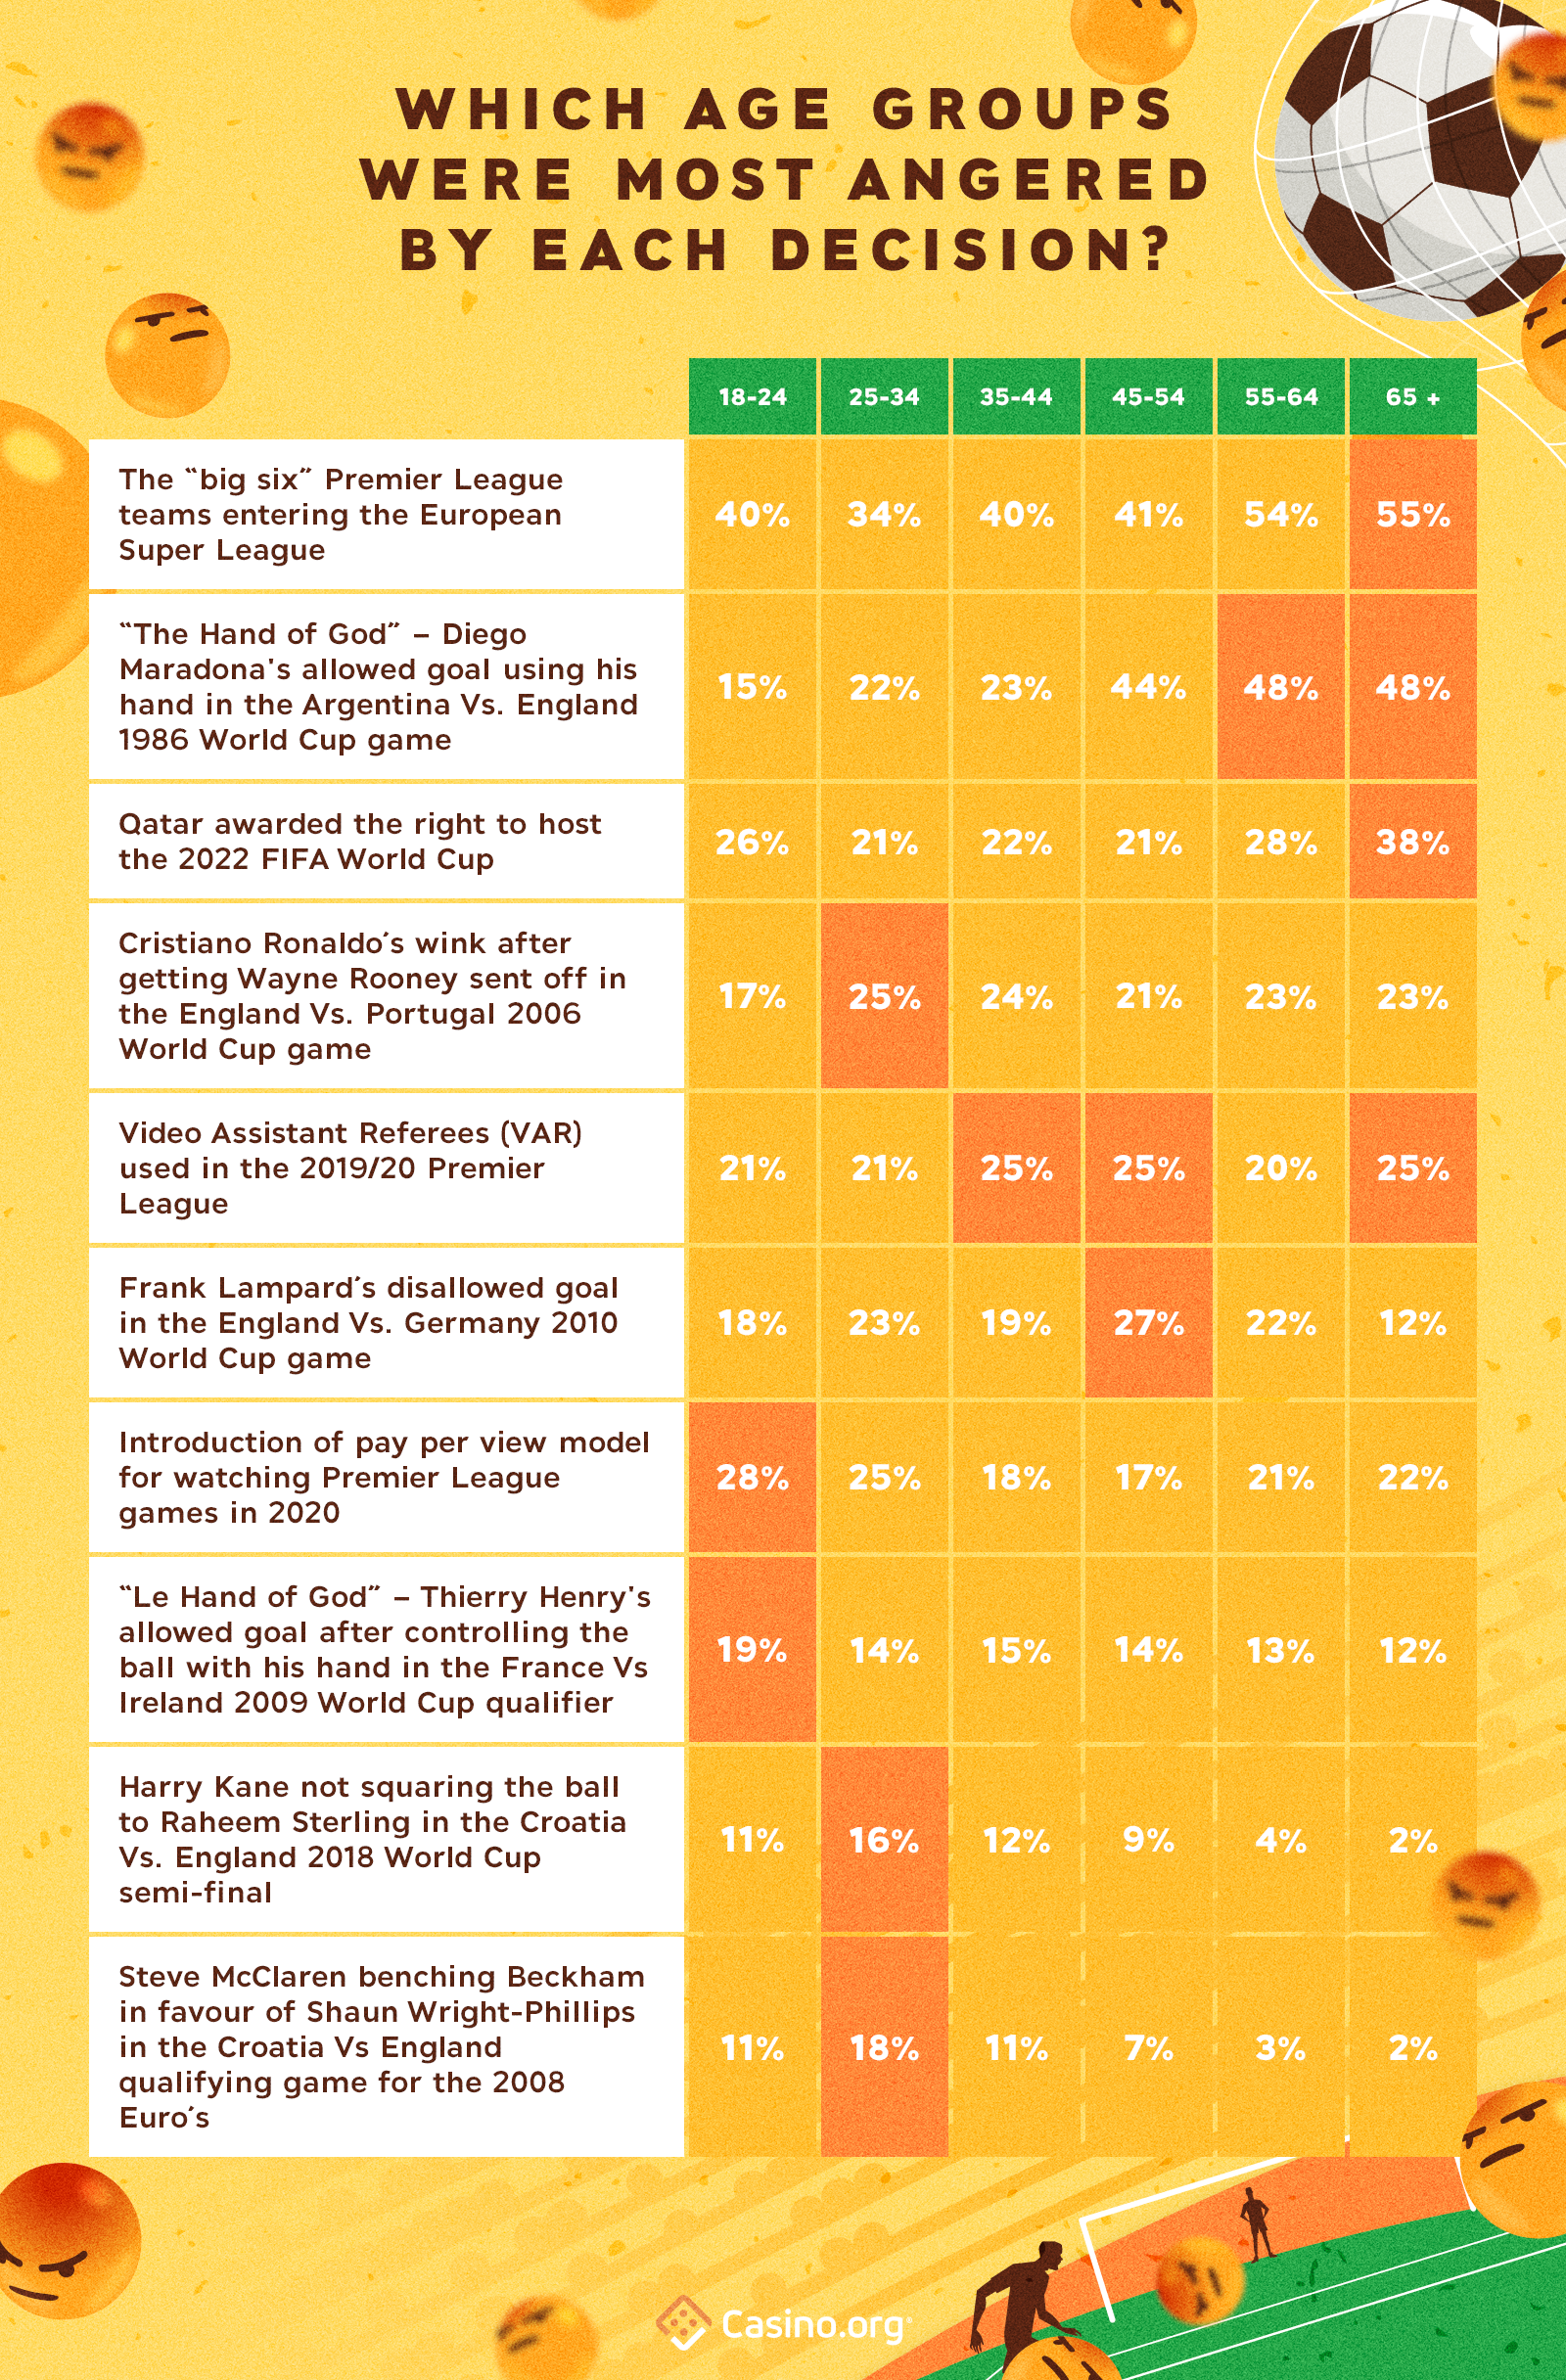 Decisions that make football players the angriest by age group - infographic